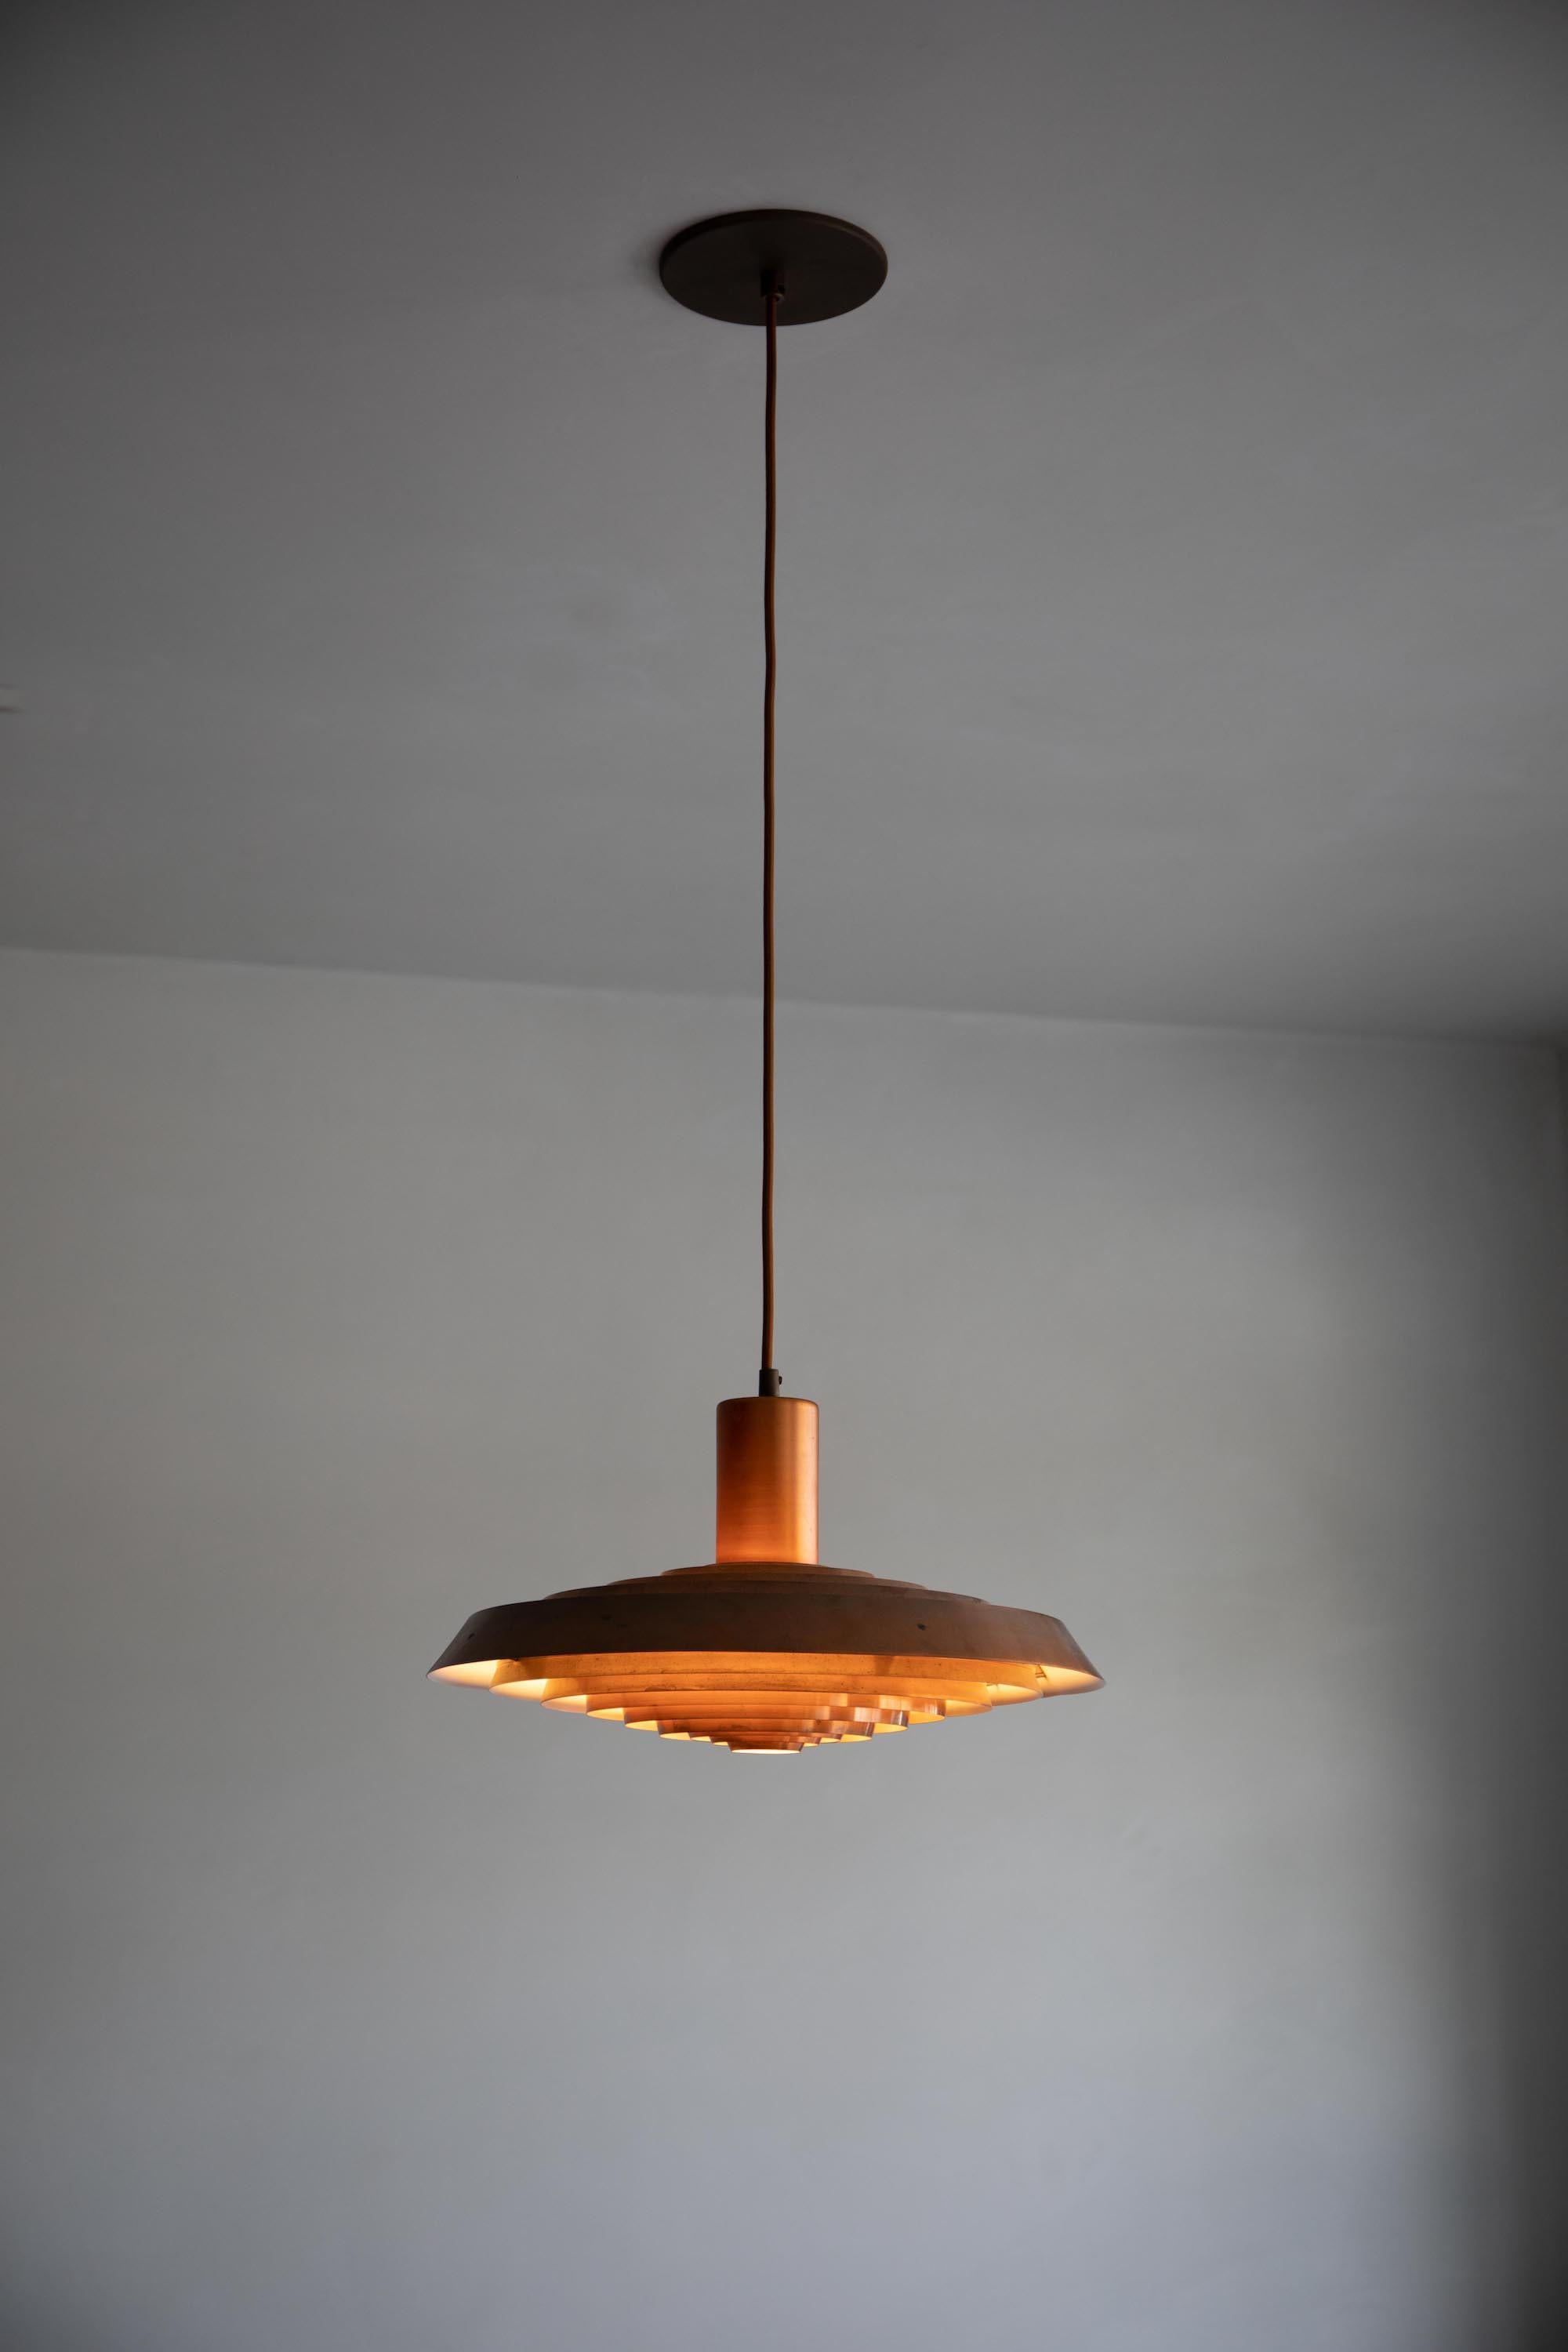 This rare copper pendant was designed by Poul Henningsen for Louis Poulsen in 1958 for the Langelinie Pavillion in Copenhagen.

It was one of the approximately twelve original ceiling lights that were commissioned from Poul Henningsen by Architects